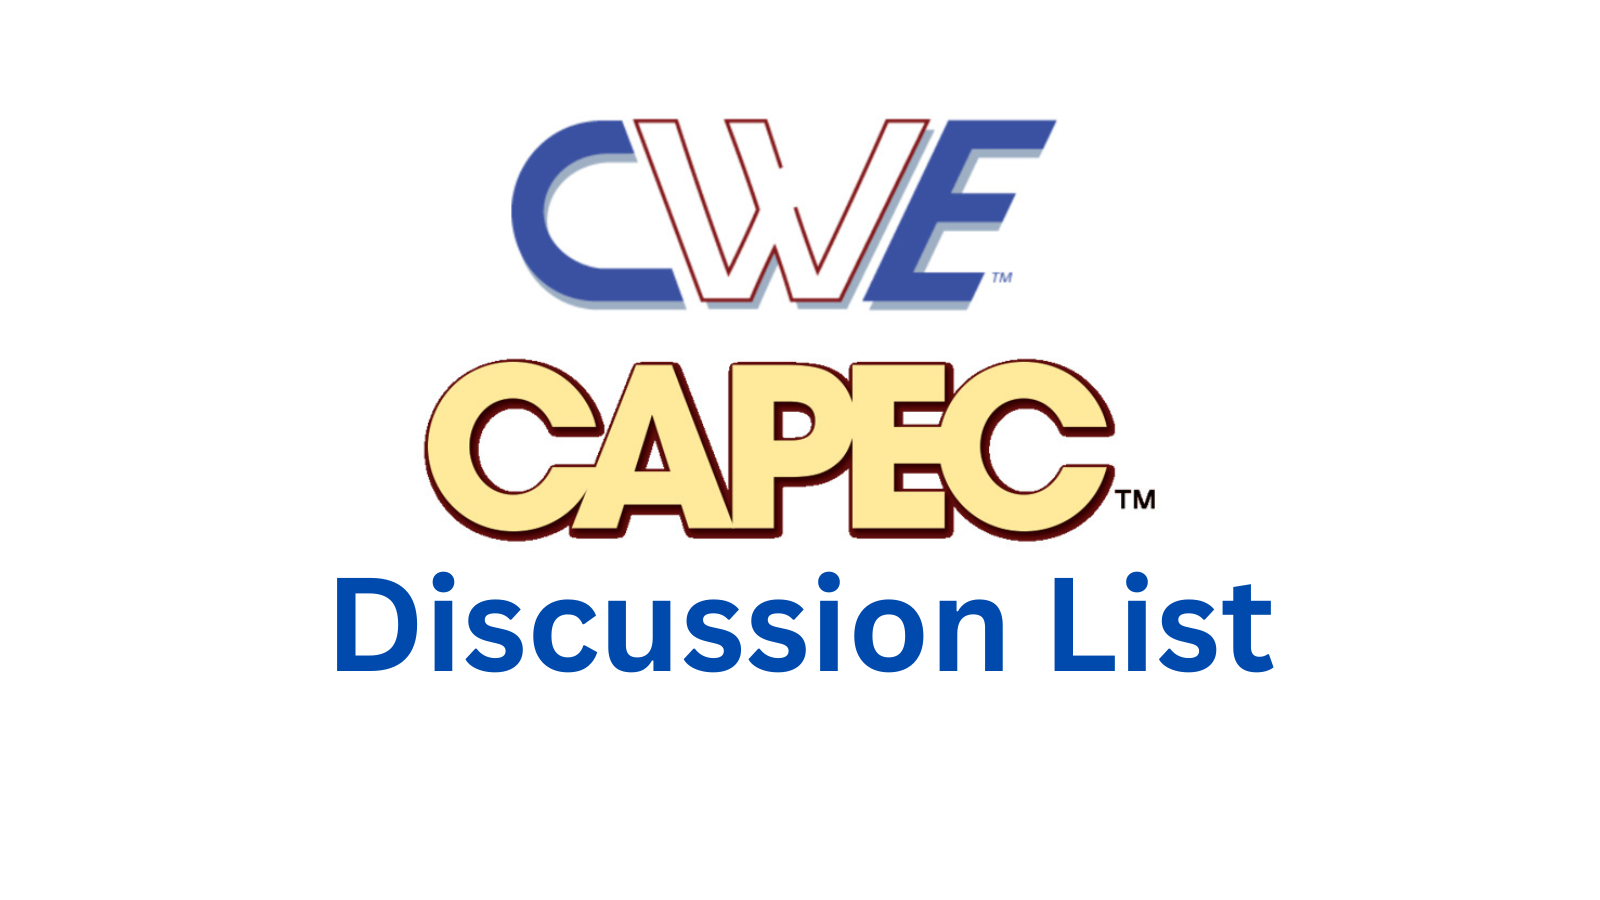 CWE Research Email Discussion List